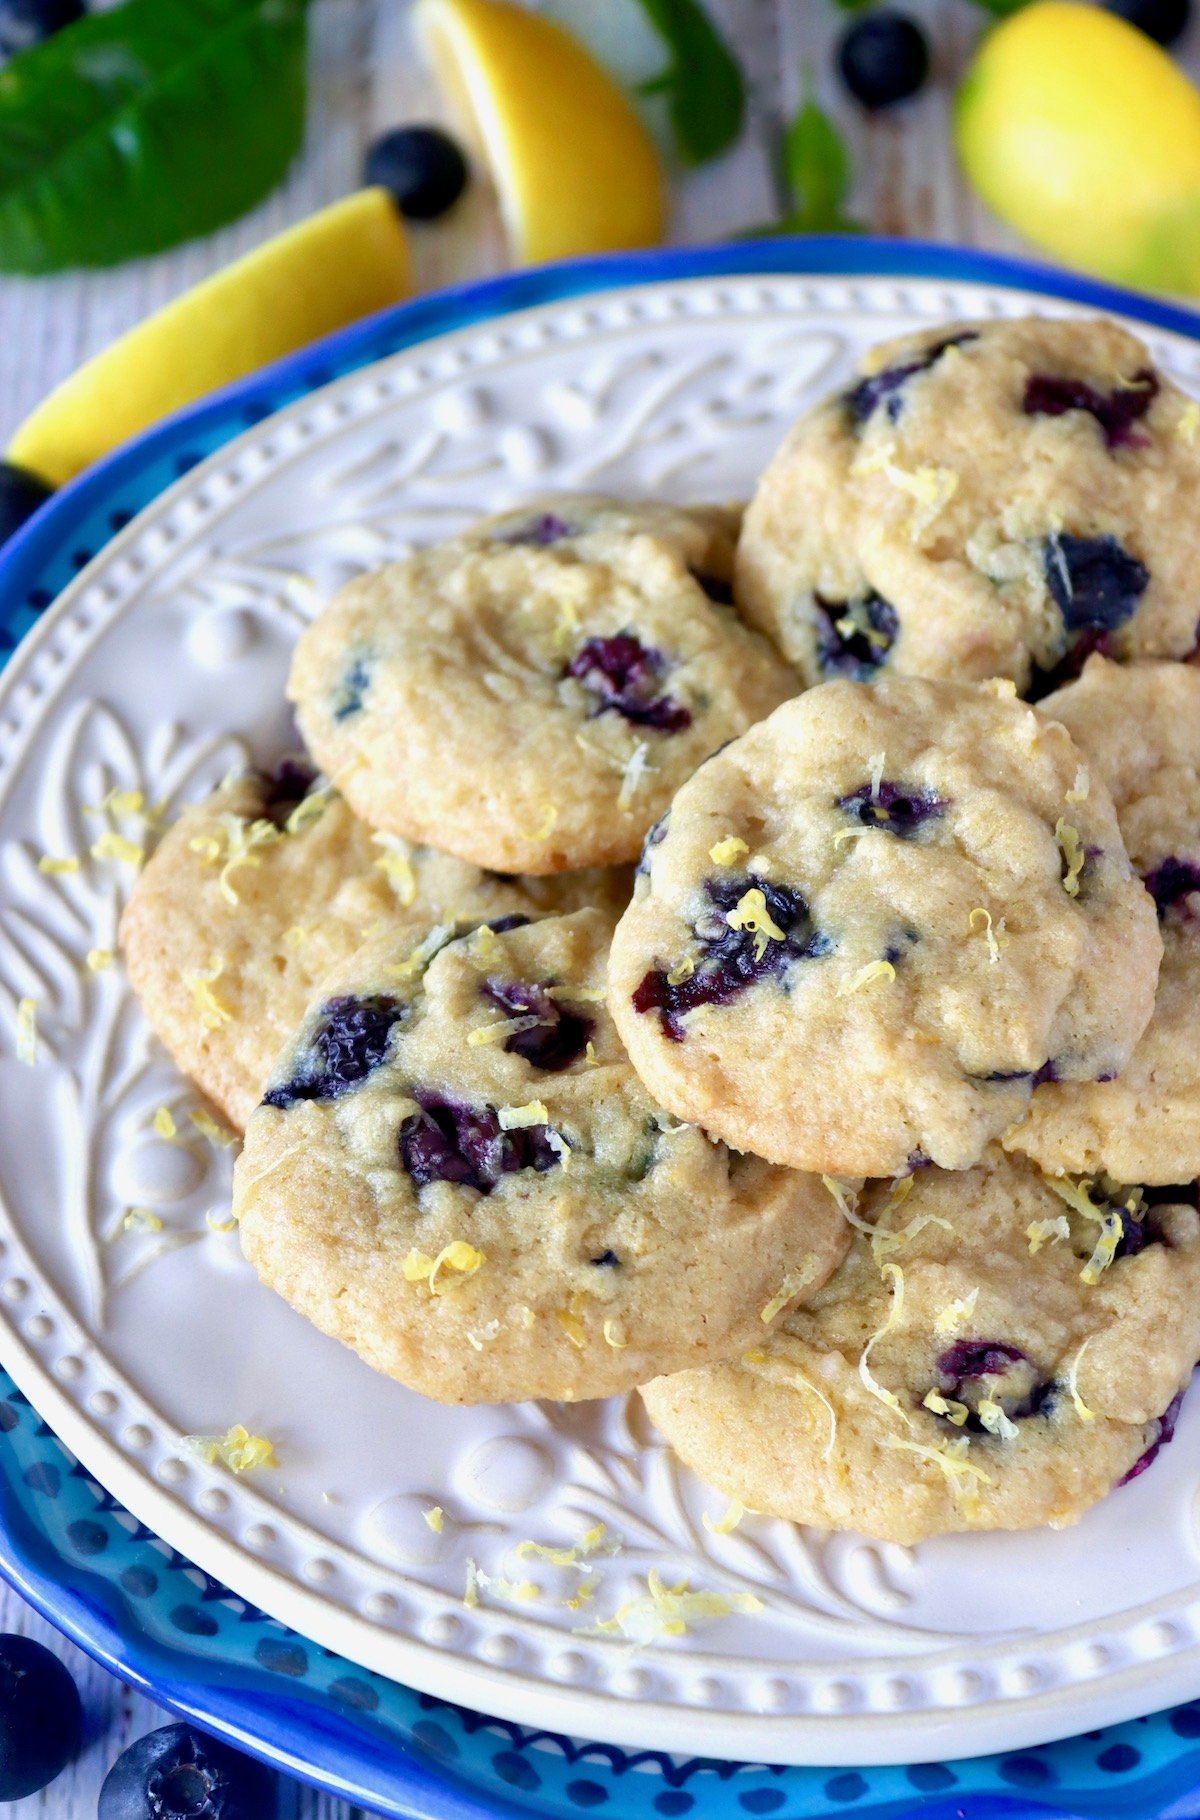 Cream-colored plate on top of a blue-rimmed plate with layered lemon blueberry cookies.